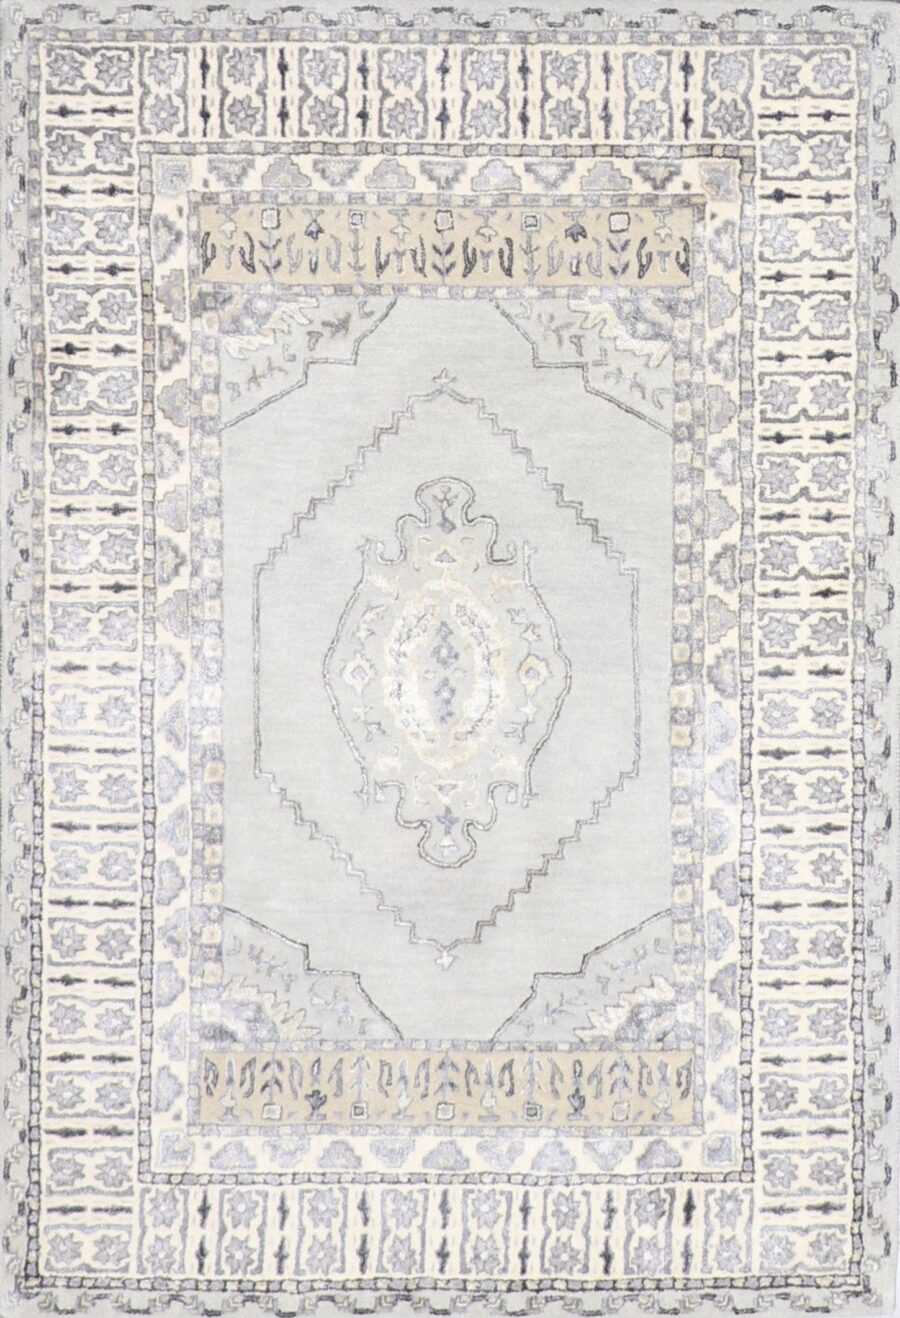 4’x6’ Decorative Gray Vintage Wool & Silk Hand-Tufted Rug - Direct Rug Import | Rugs in Chicago, Indiana,South Bend,Granger